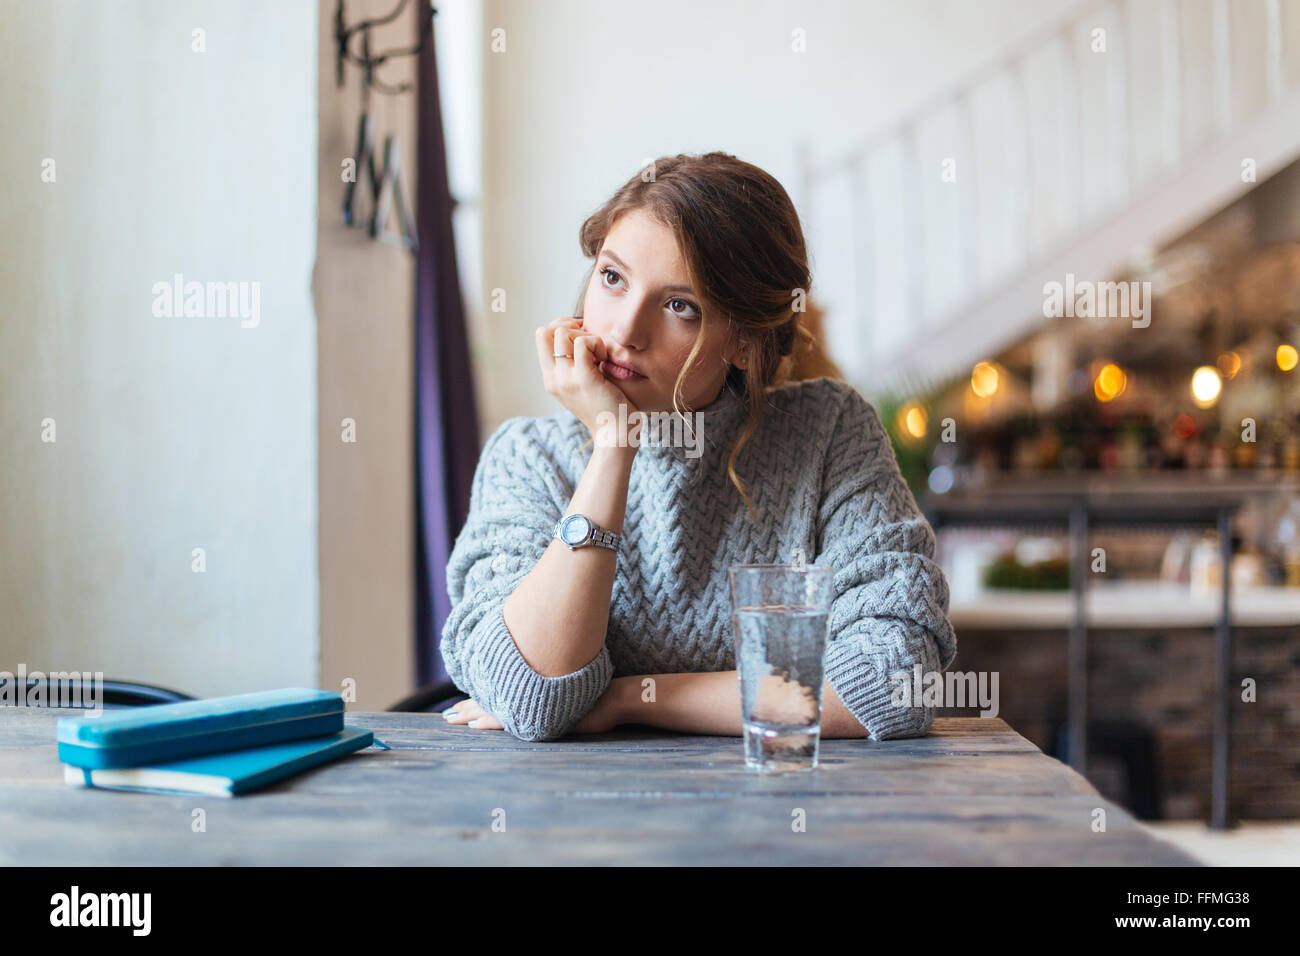 Woman waiting for somebody in cafe Stock Photo